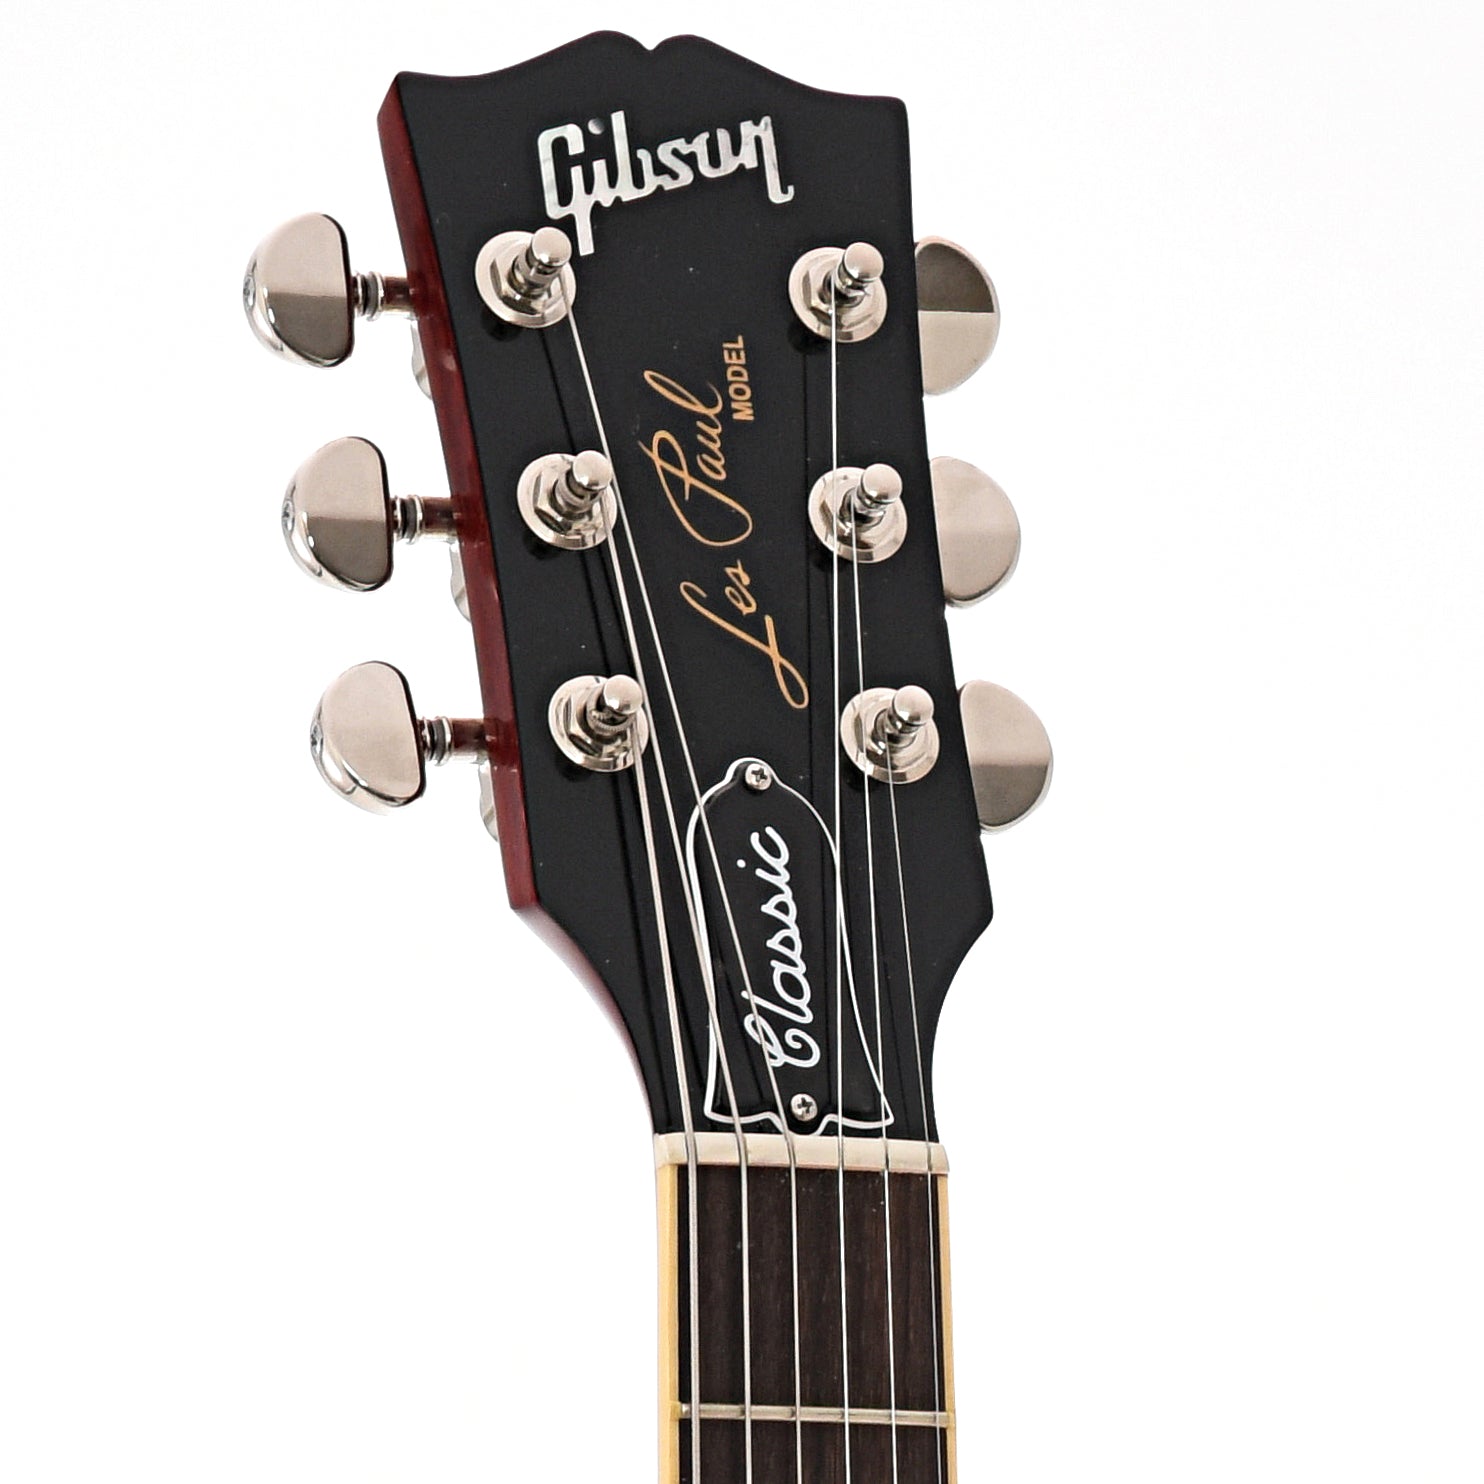 Front headstock of Gibson Les Paul Classic